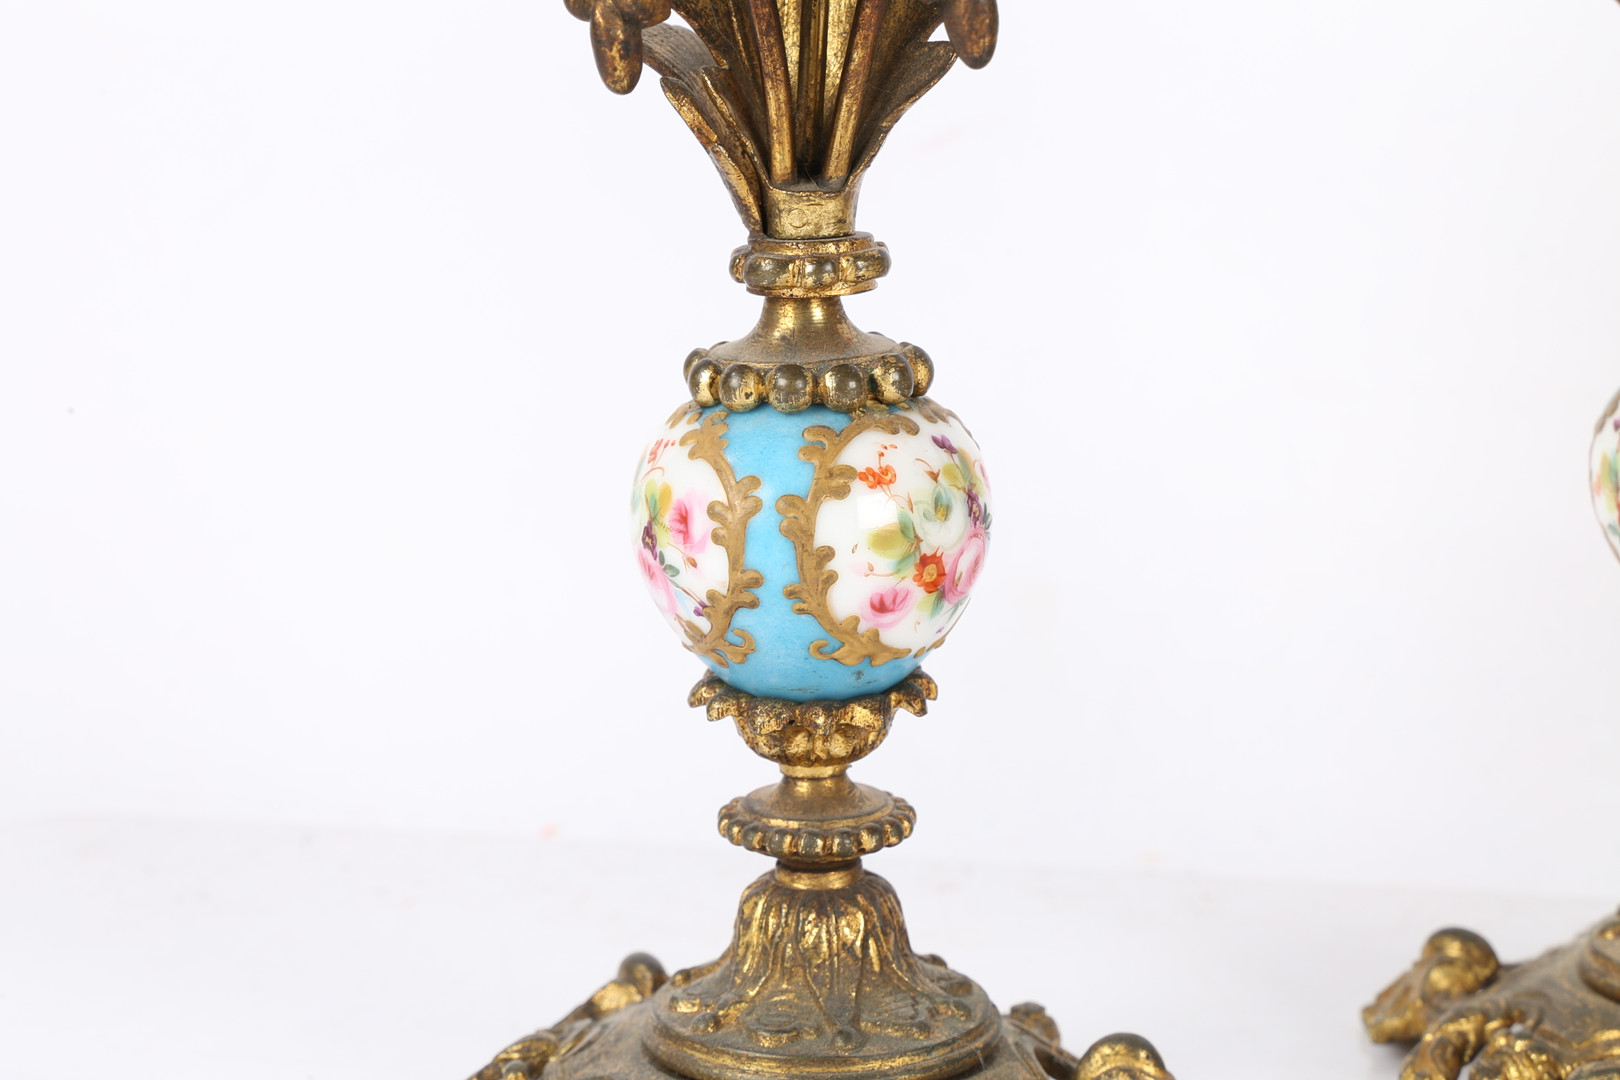 A PAIR OF 19TH CENTURY FRENCH 'SEVRES' STYLE PORCELAIN GILT CANDLESTICKS. - Image 3 of 4